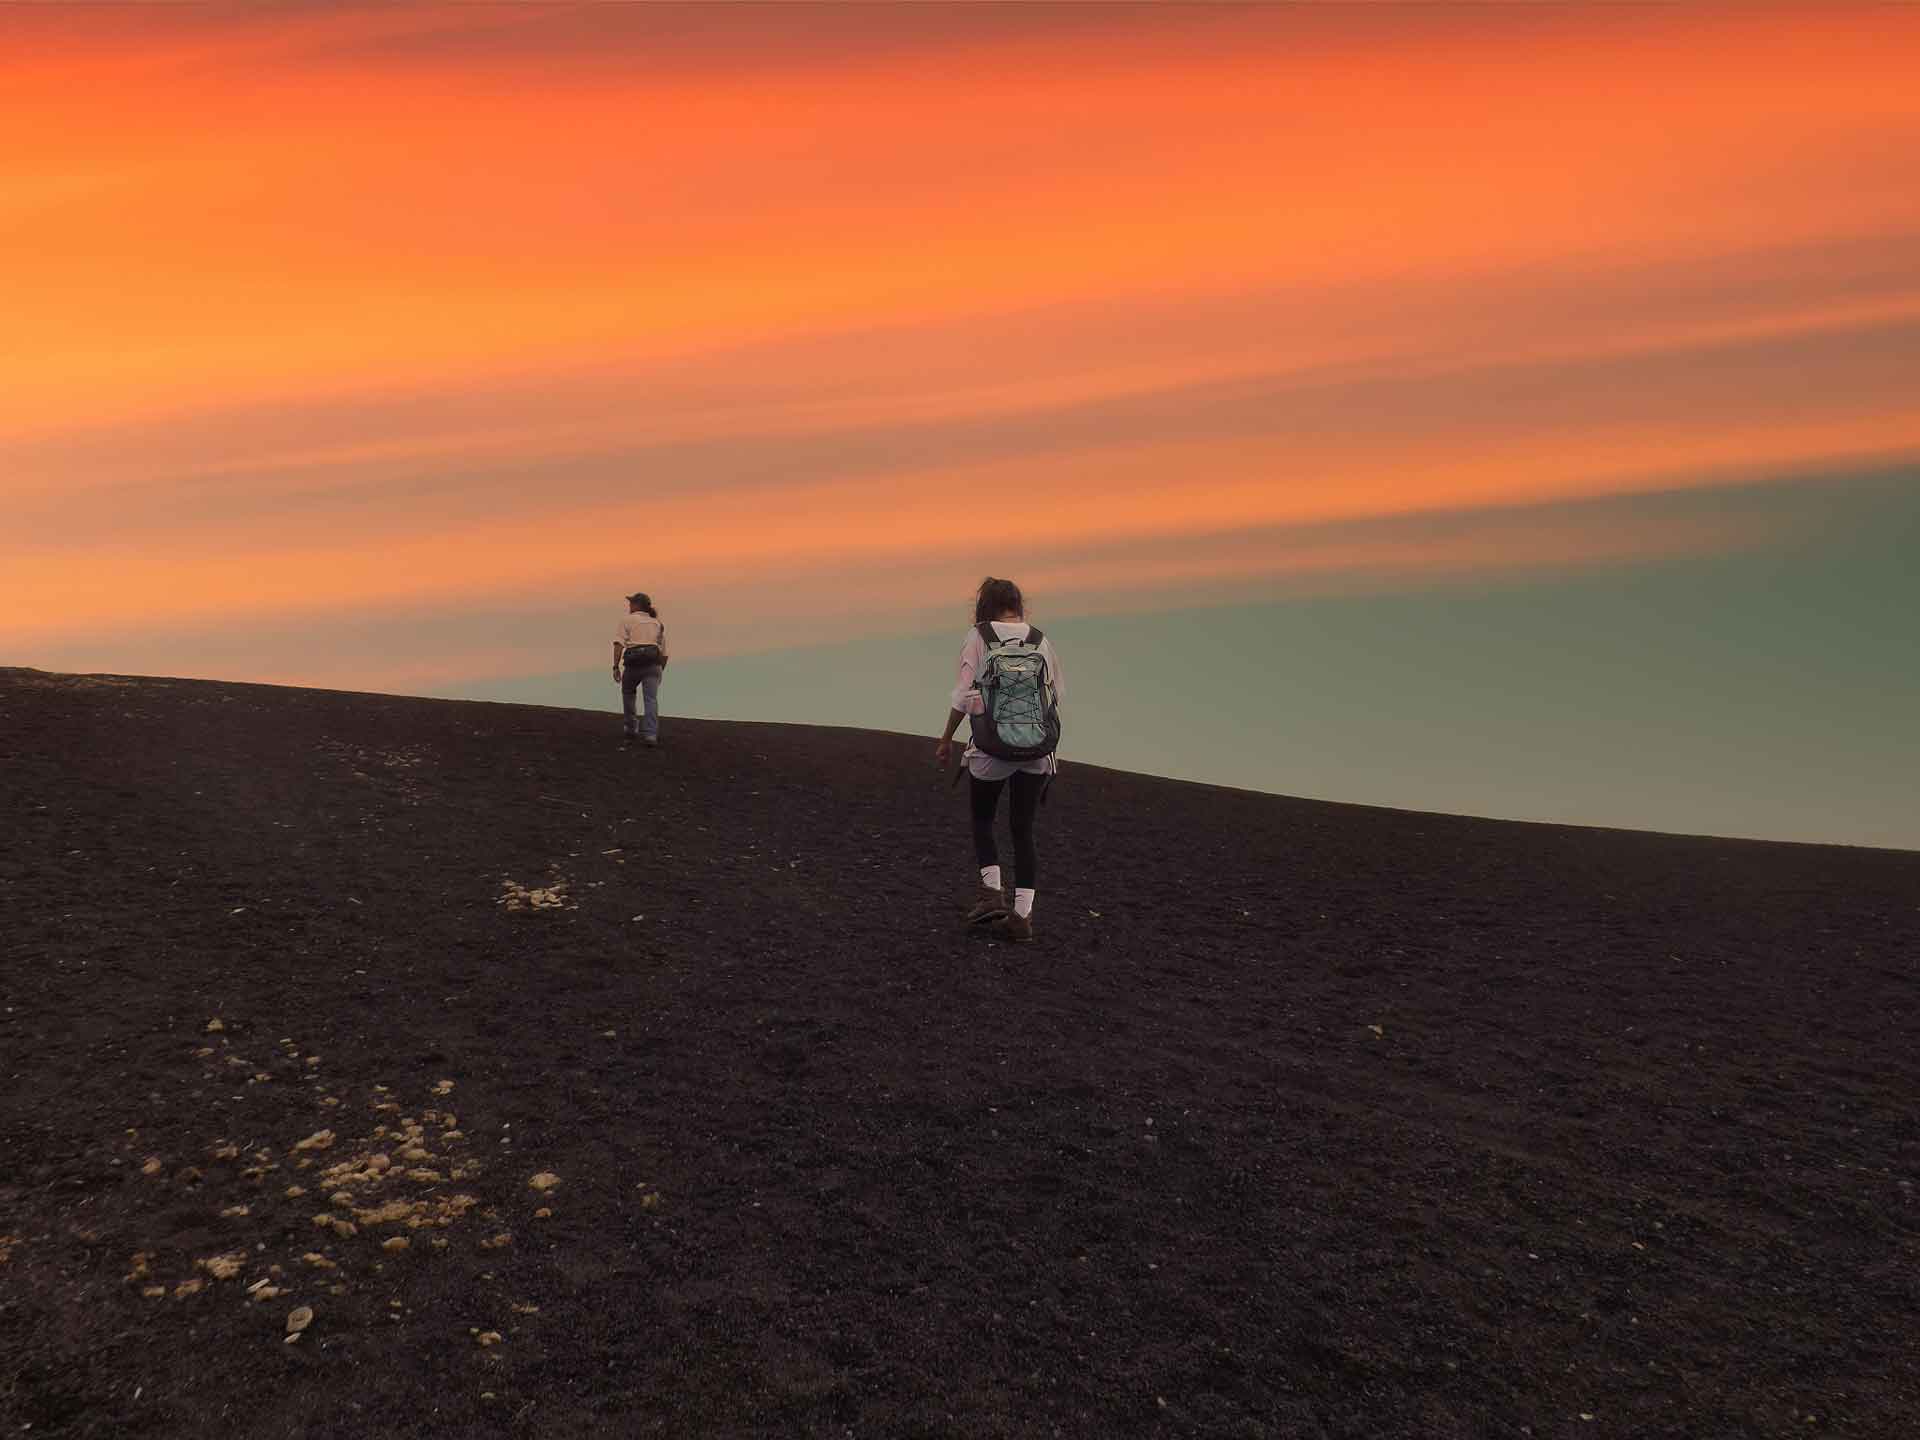 Adventurers reaching the peak of Pacaya volcano during the sunset as a part of the Guatemala Hiking Trails